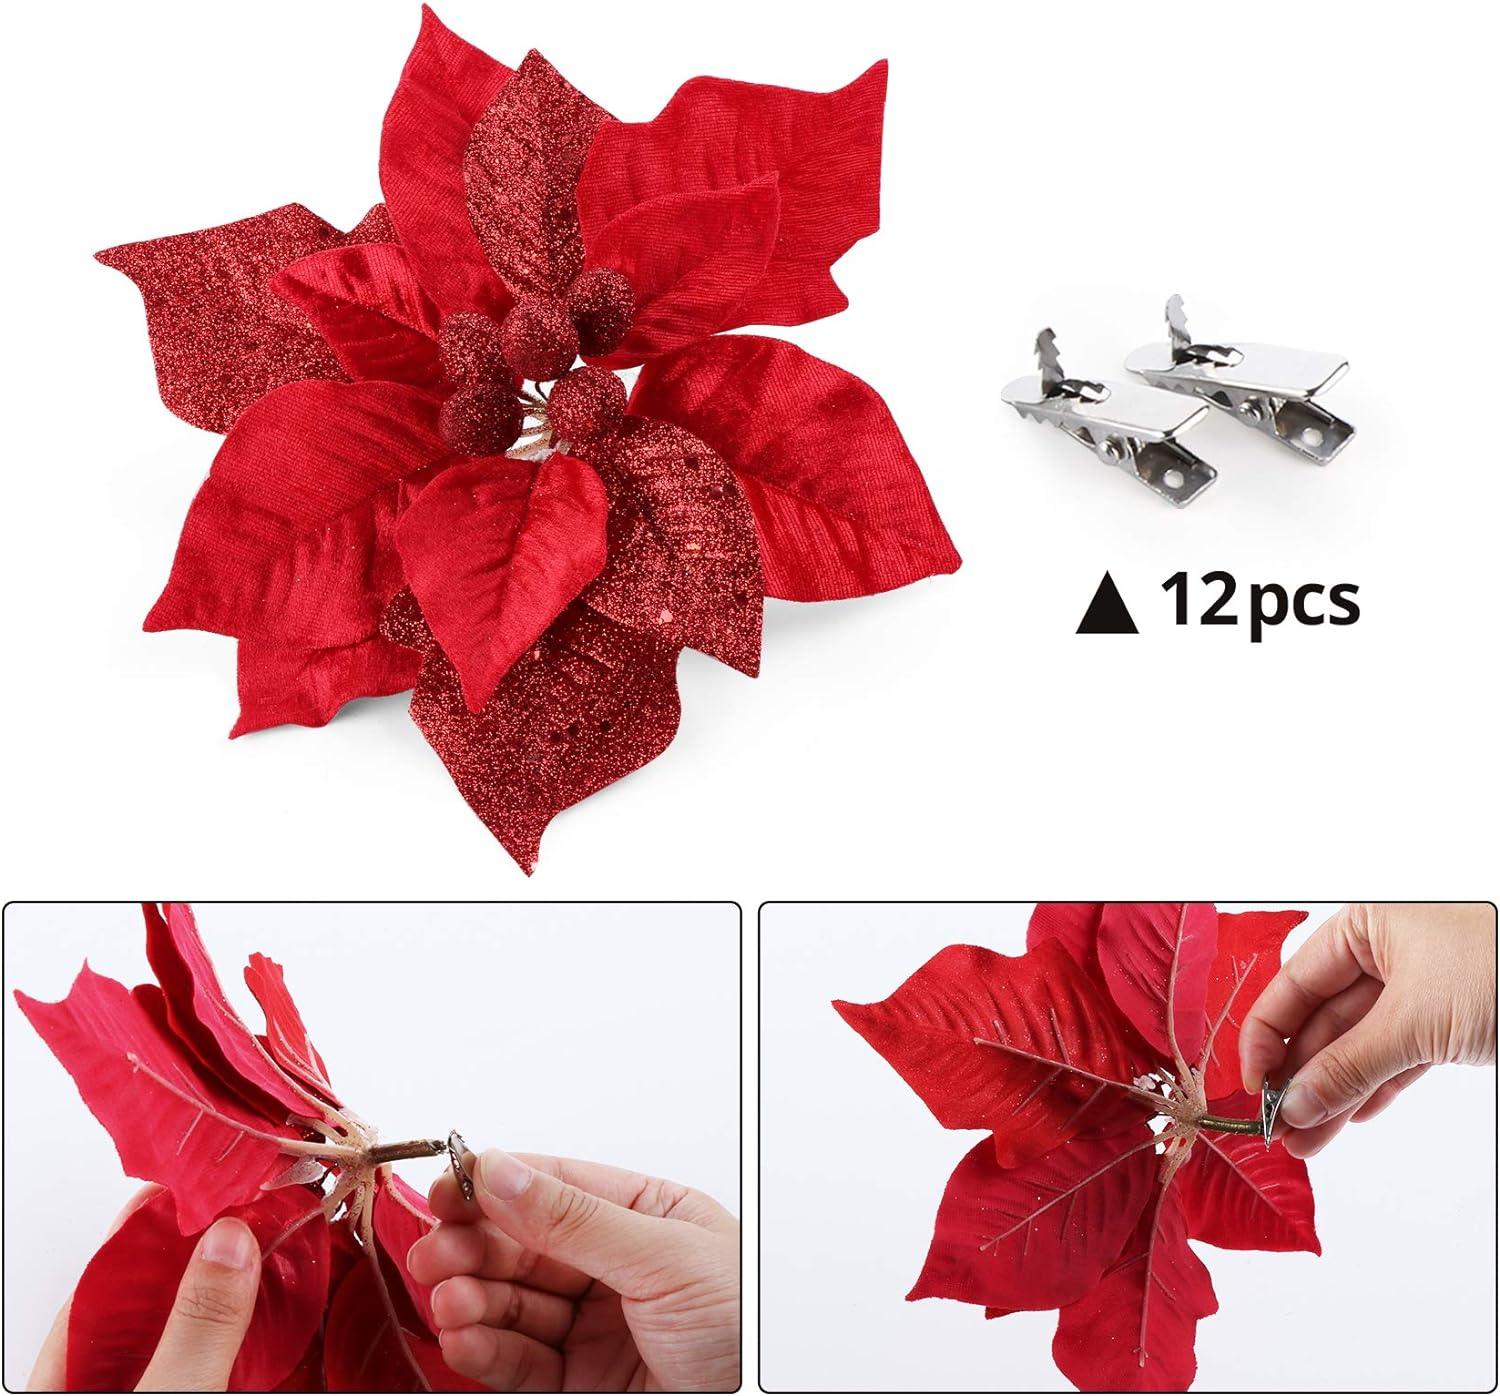 10 pcs Christmas Glittery Flower 23CM Red Artificial Poinsettia Large - Massive Discounts